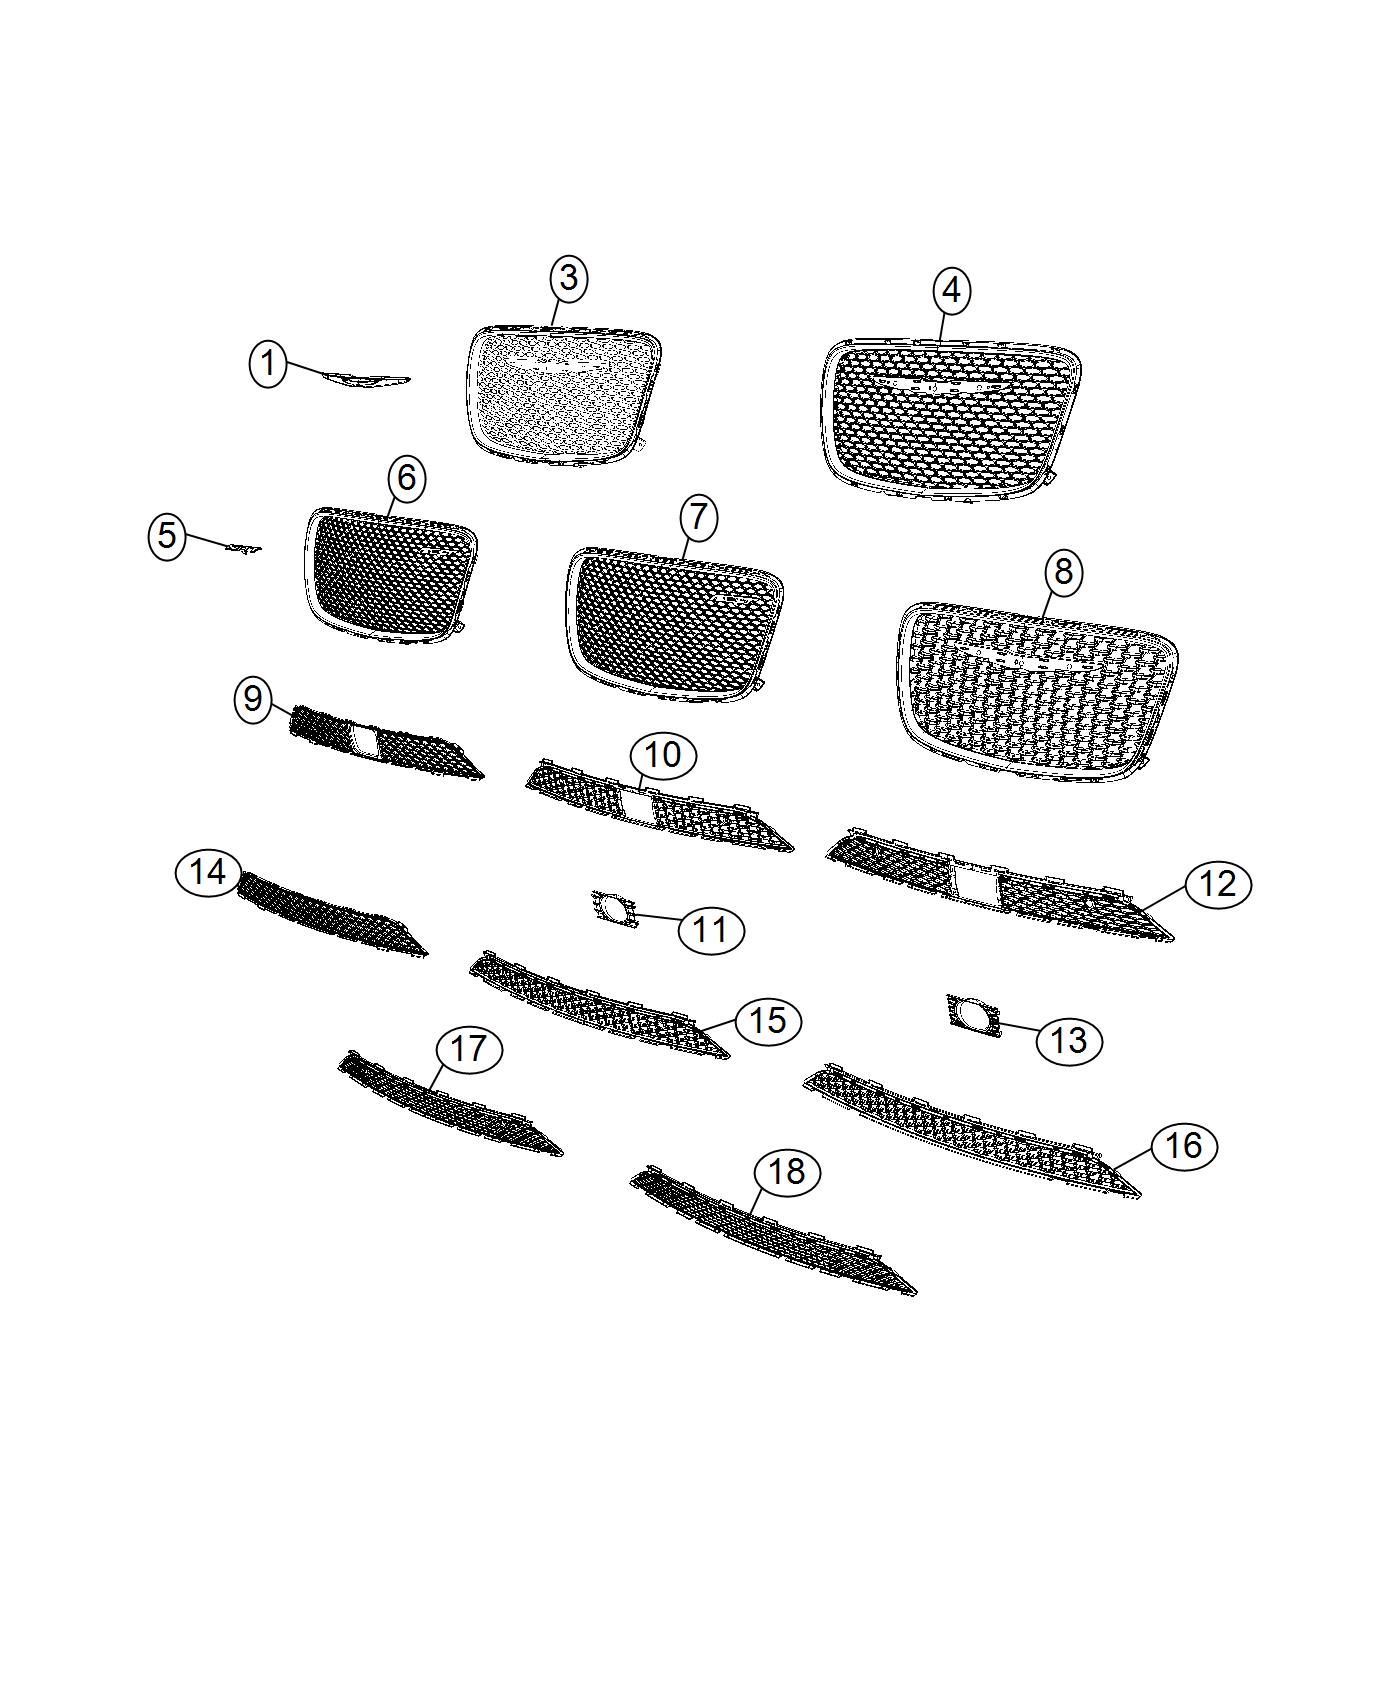 Grilles and Related Items. Diagram